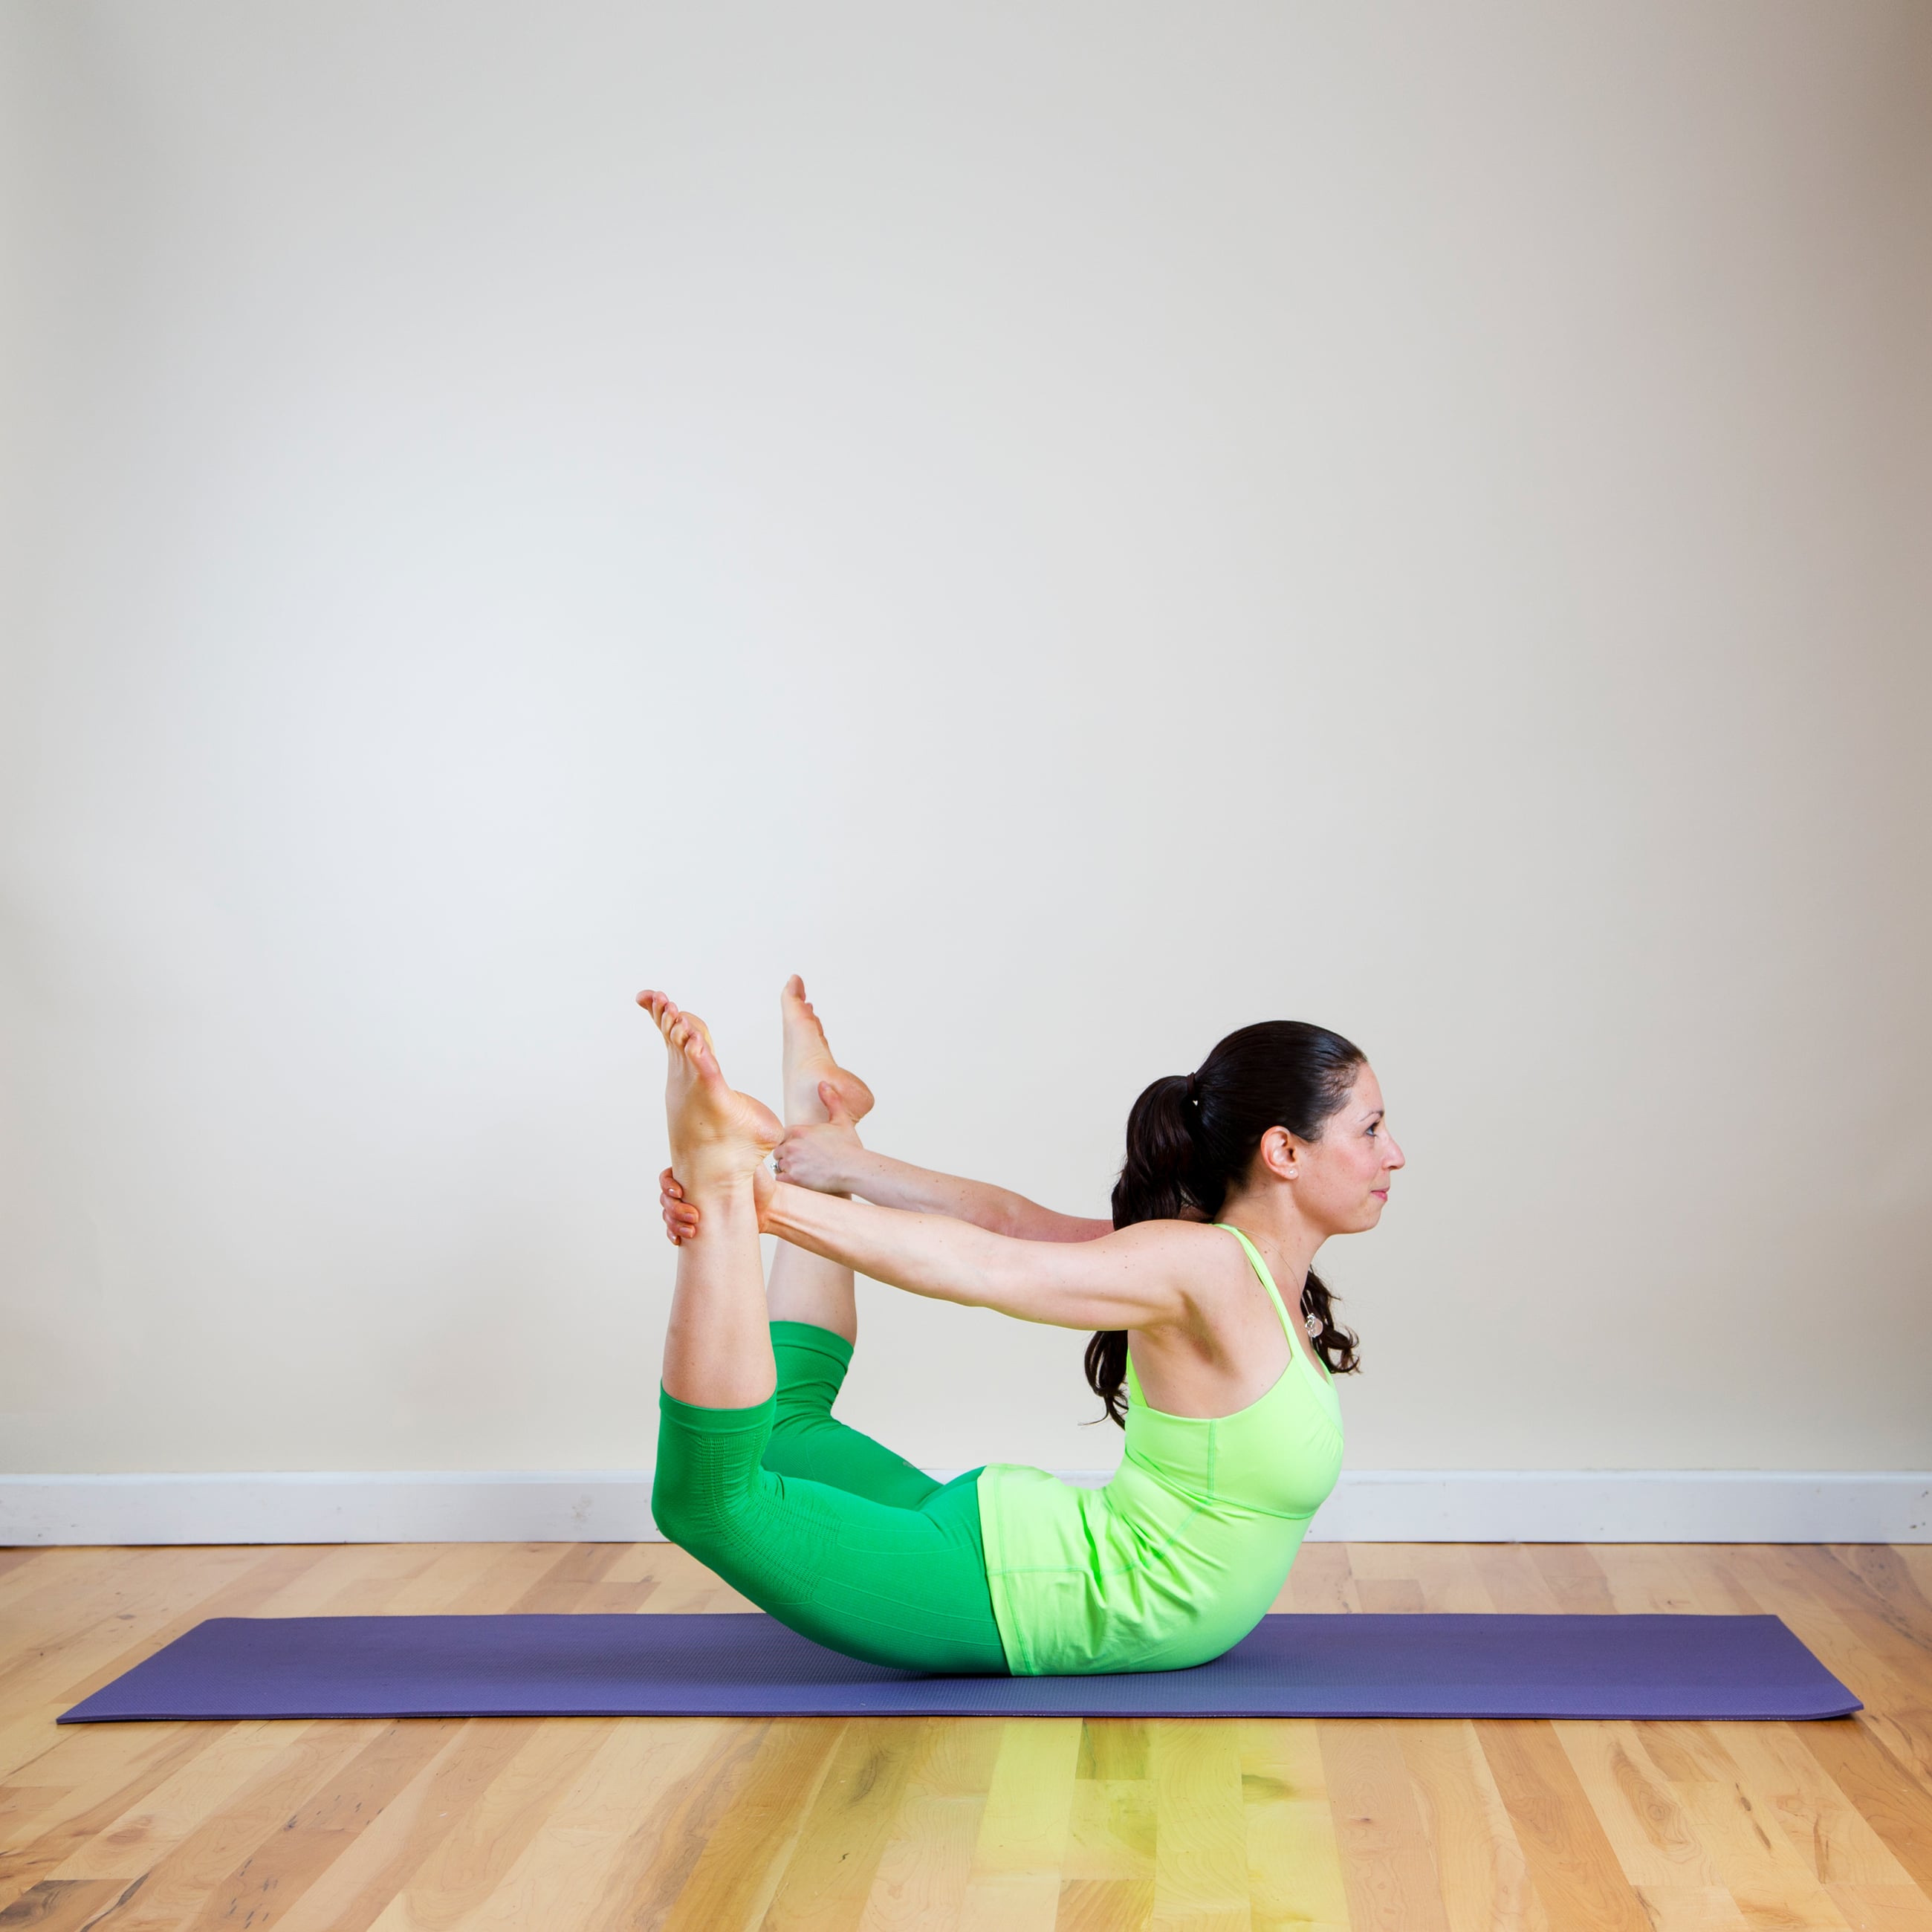 How Long Does It Take to Tone Your Arms with Yoga? - Yoga Rove